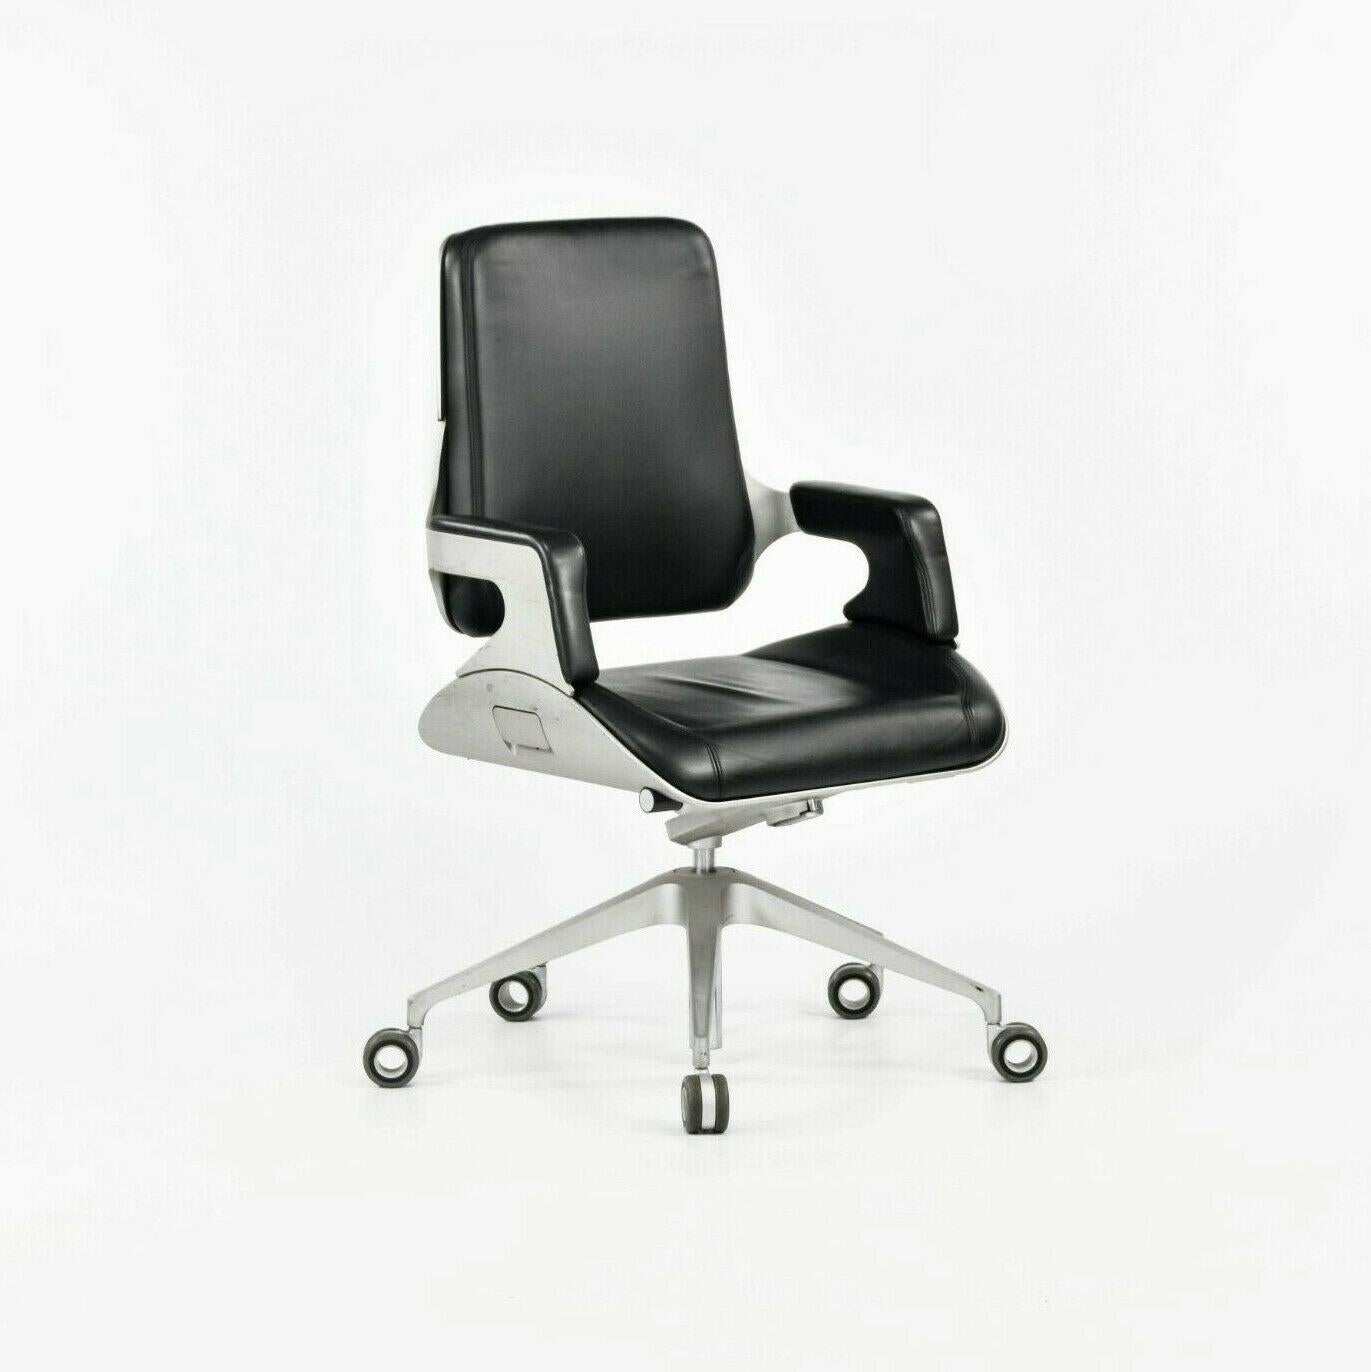 2008 Interstuhl Silver 262S Office Desk Chair in Black Leather by Hadi Teherani In Good Condition For Sale In Philadelphia, PA